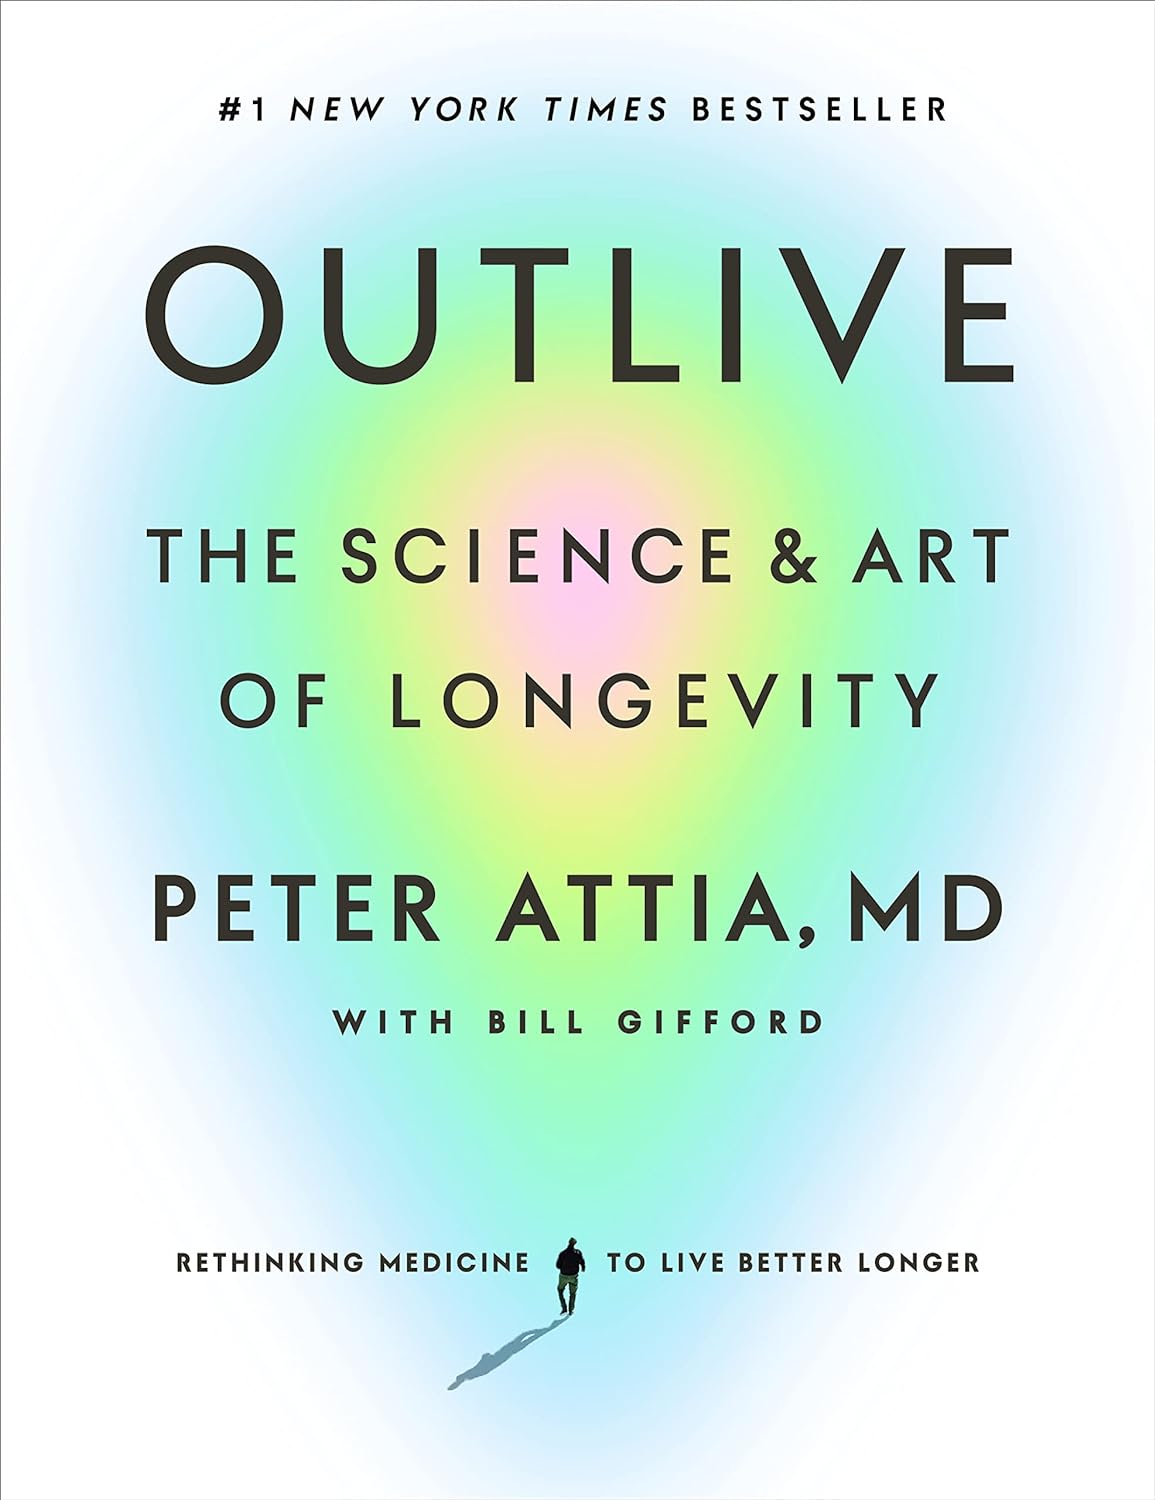 Outlive longevity book cover